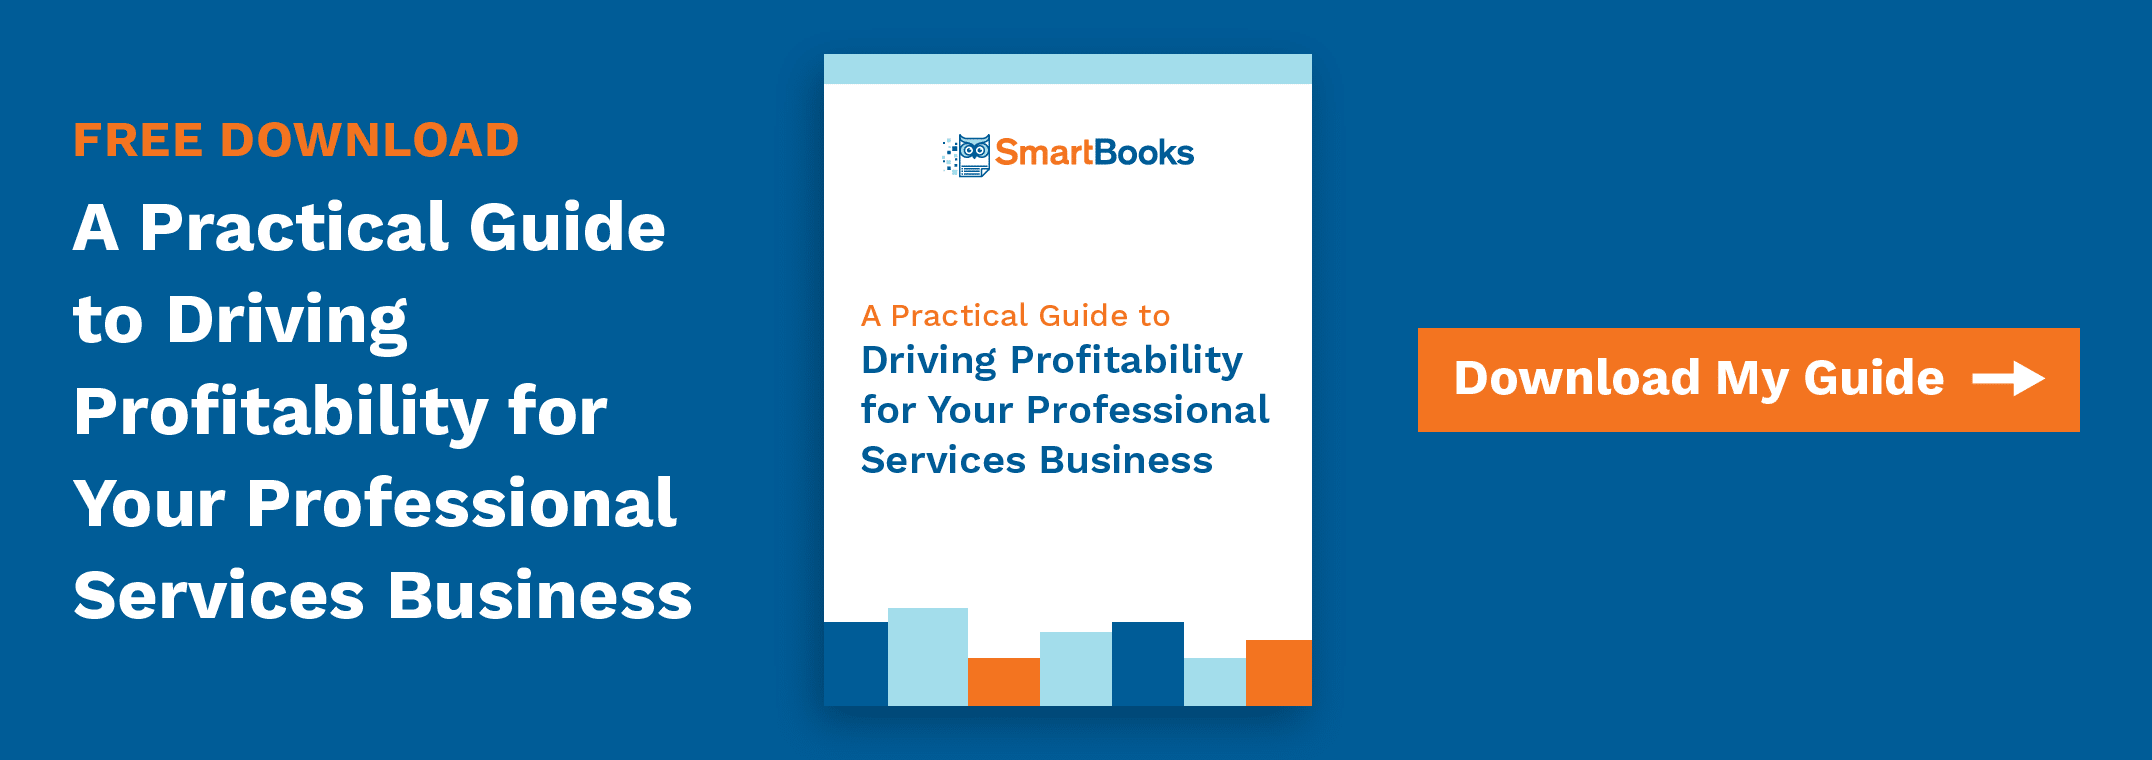 A Practical Guide to Driving Profitability for Your Professional Services Business